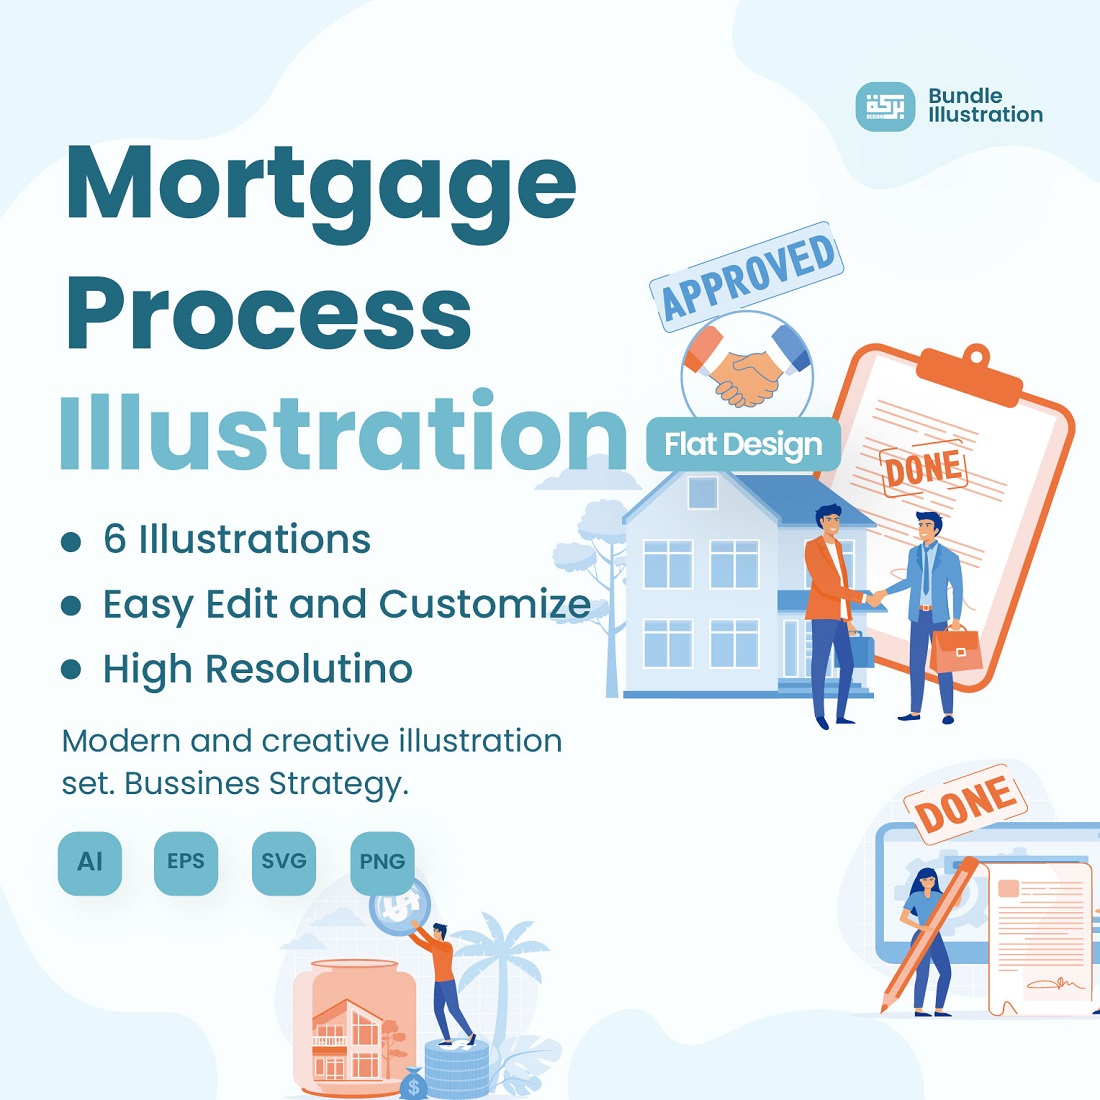 Illustration of Mortgage Purchase & Approval cover image.